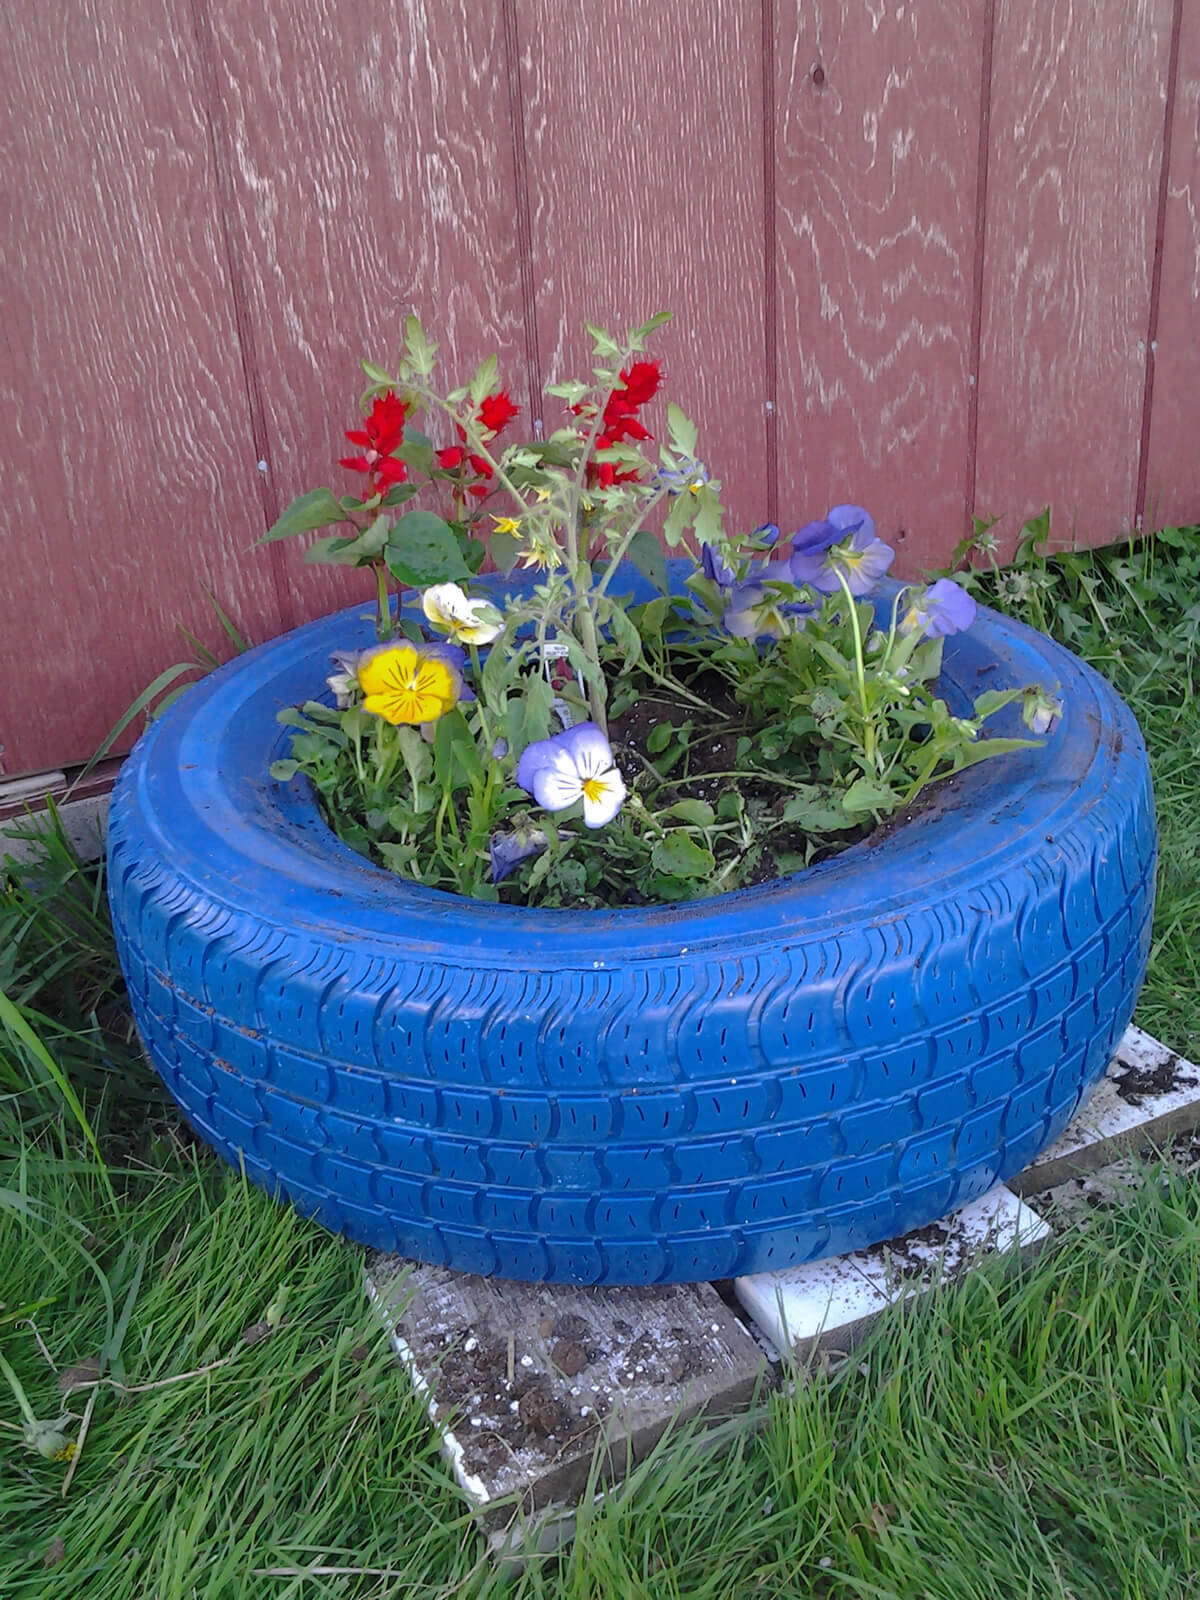 Painted Old Tires with Pansies